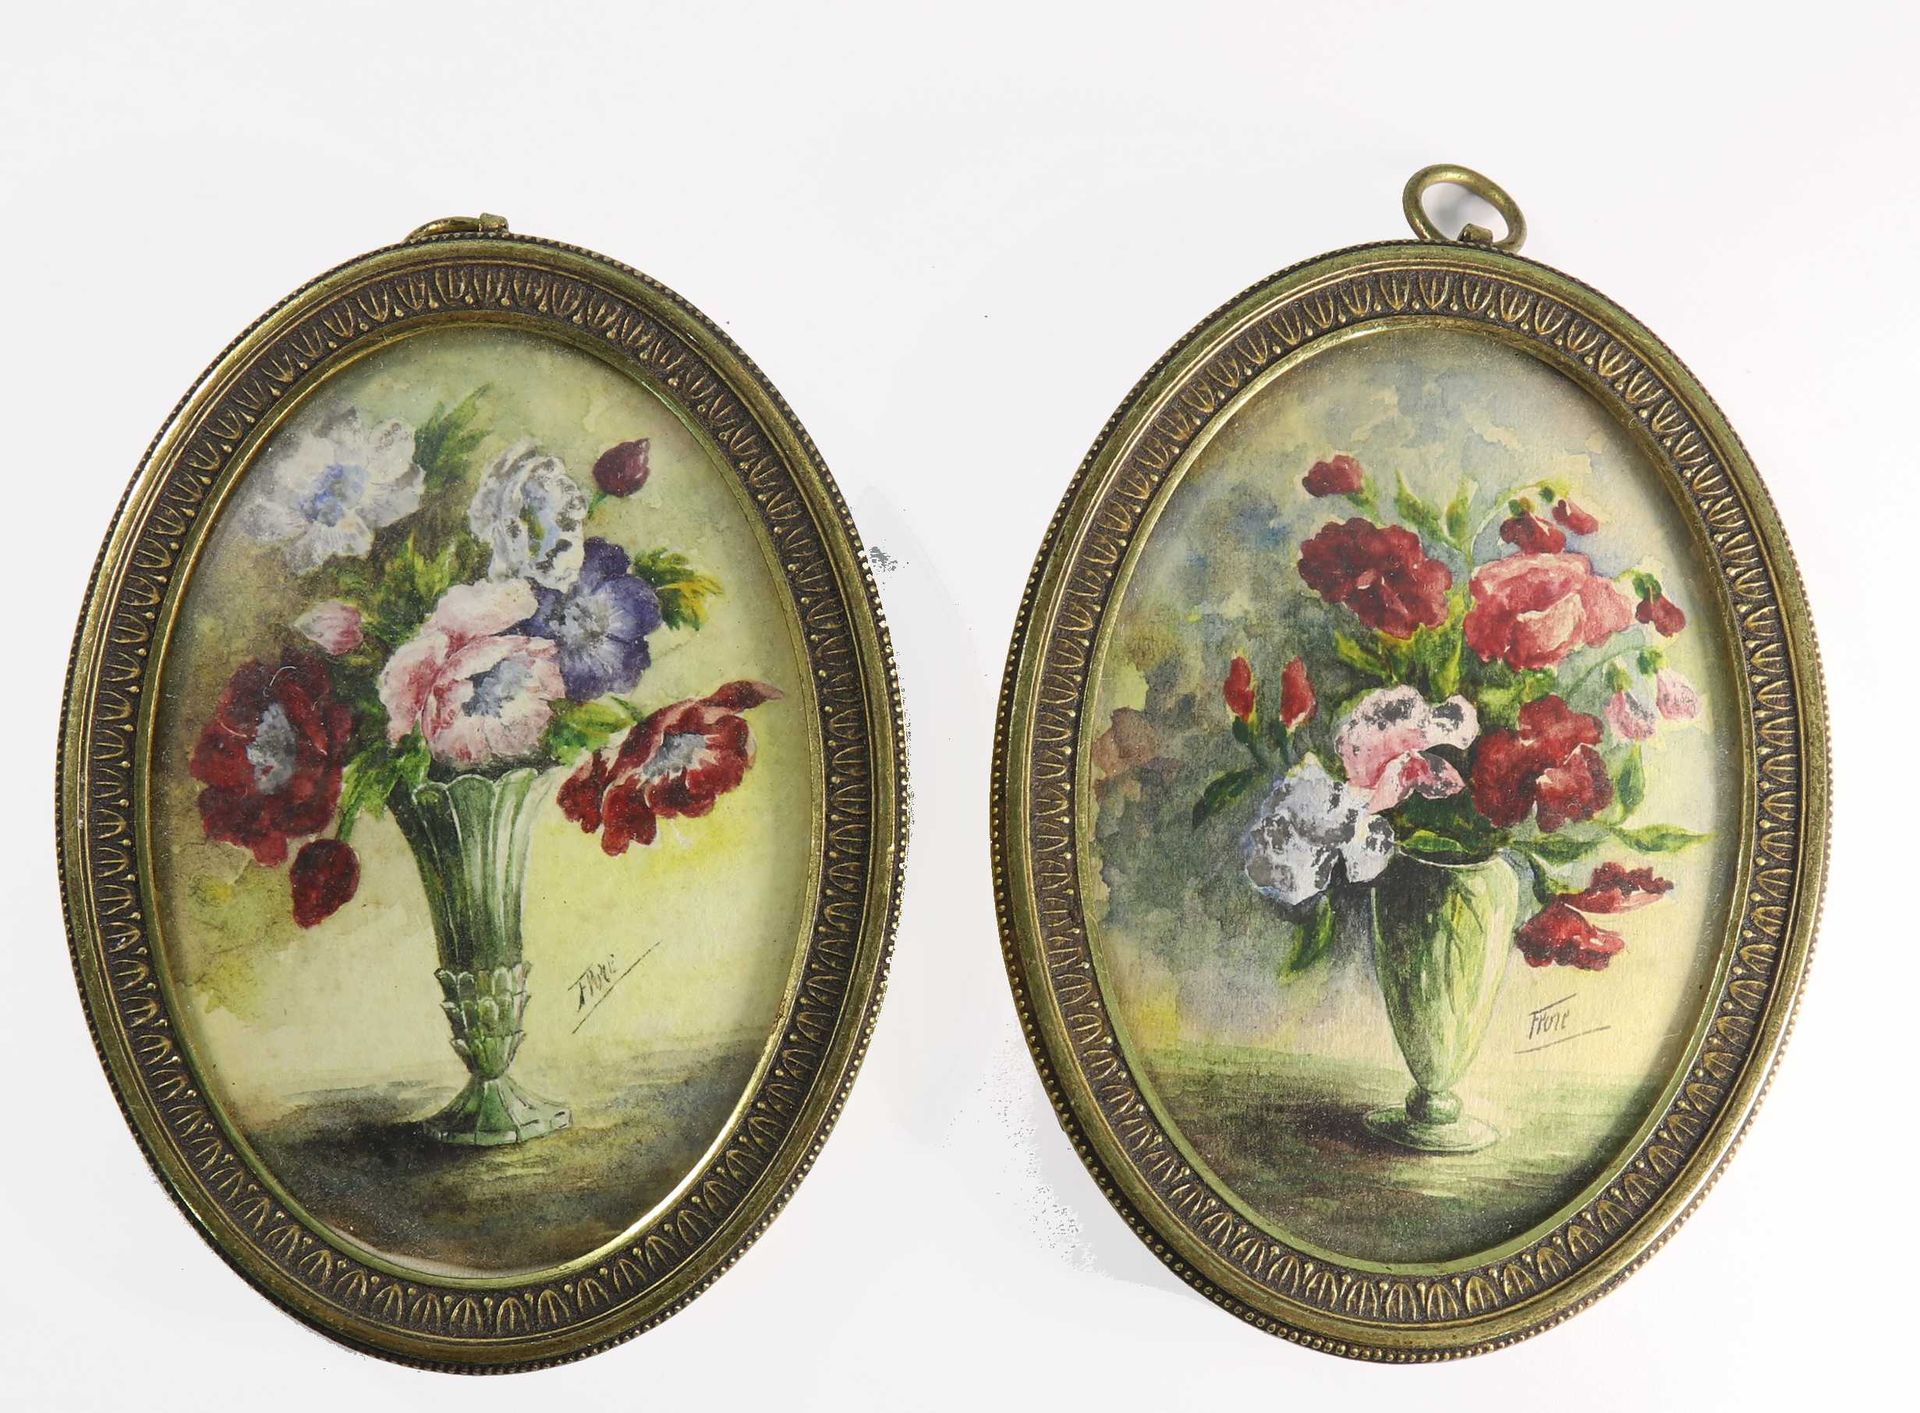 Null pair of medallions : FLORA, pair of bouquets in vases, watercolor, sbd, 9X7